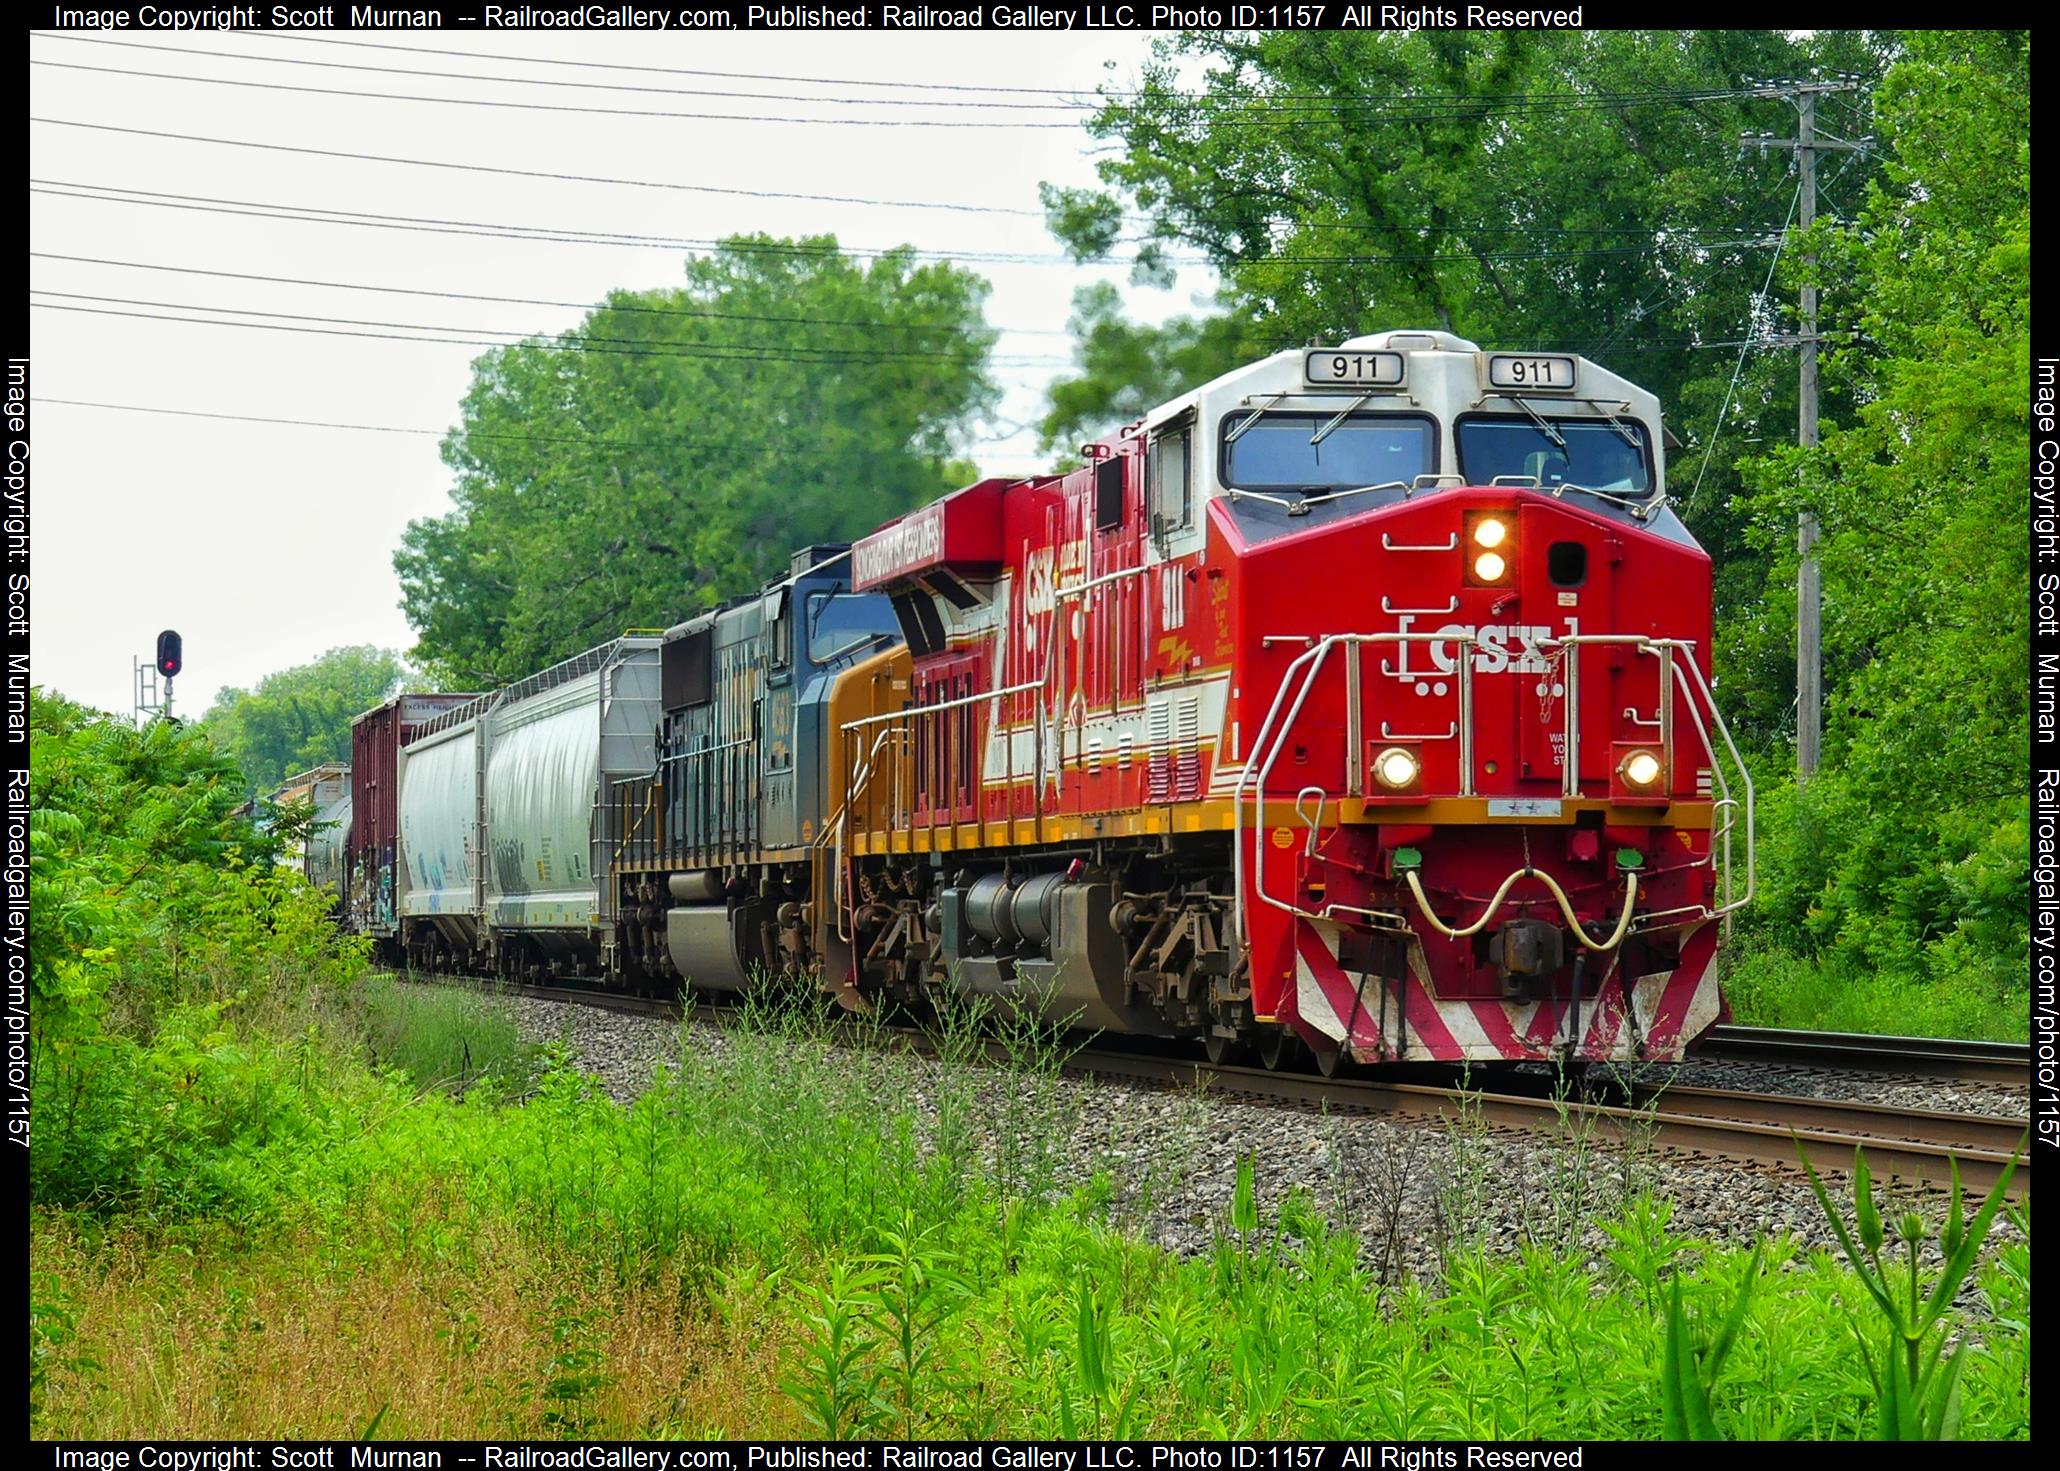 CSX 911 is a class GE ES44AC and  is pictured in Perinton , New York, United States.  This was taken along the Rochester Subdivision  on the CSX Transportation. Photo Copyright: Scott  Murnan  uploaded to Railroad Gallery on 06/21/2023. This photograph of CSX 911 was taken on Wednesday, June 21, 2023. All Rights Reserved. 